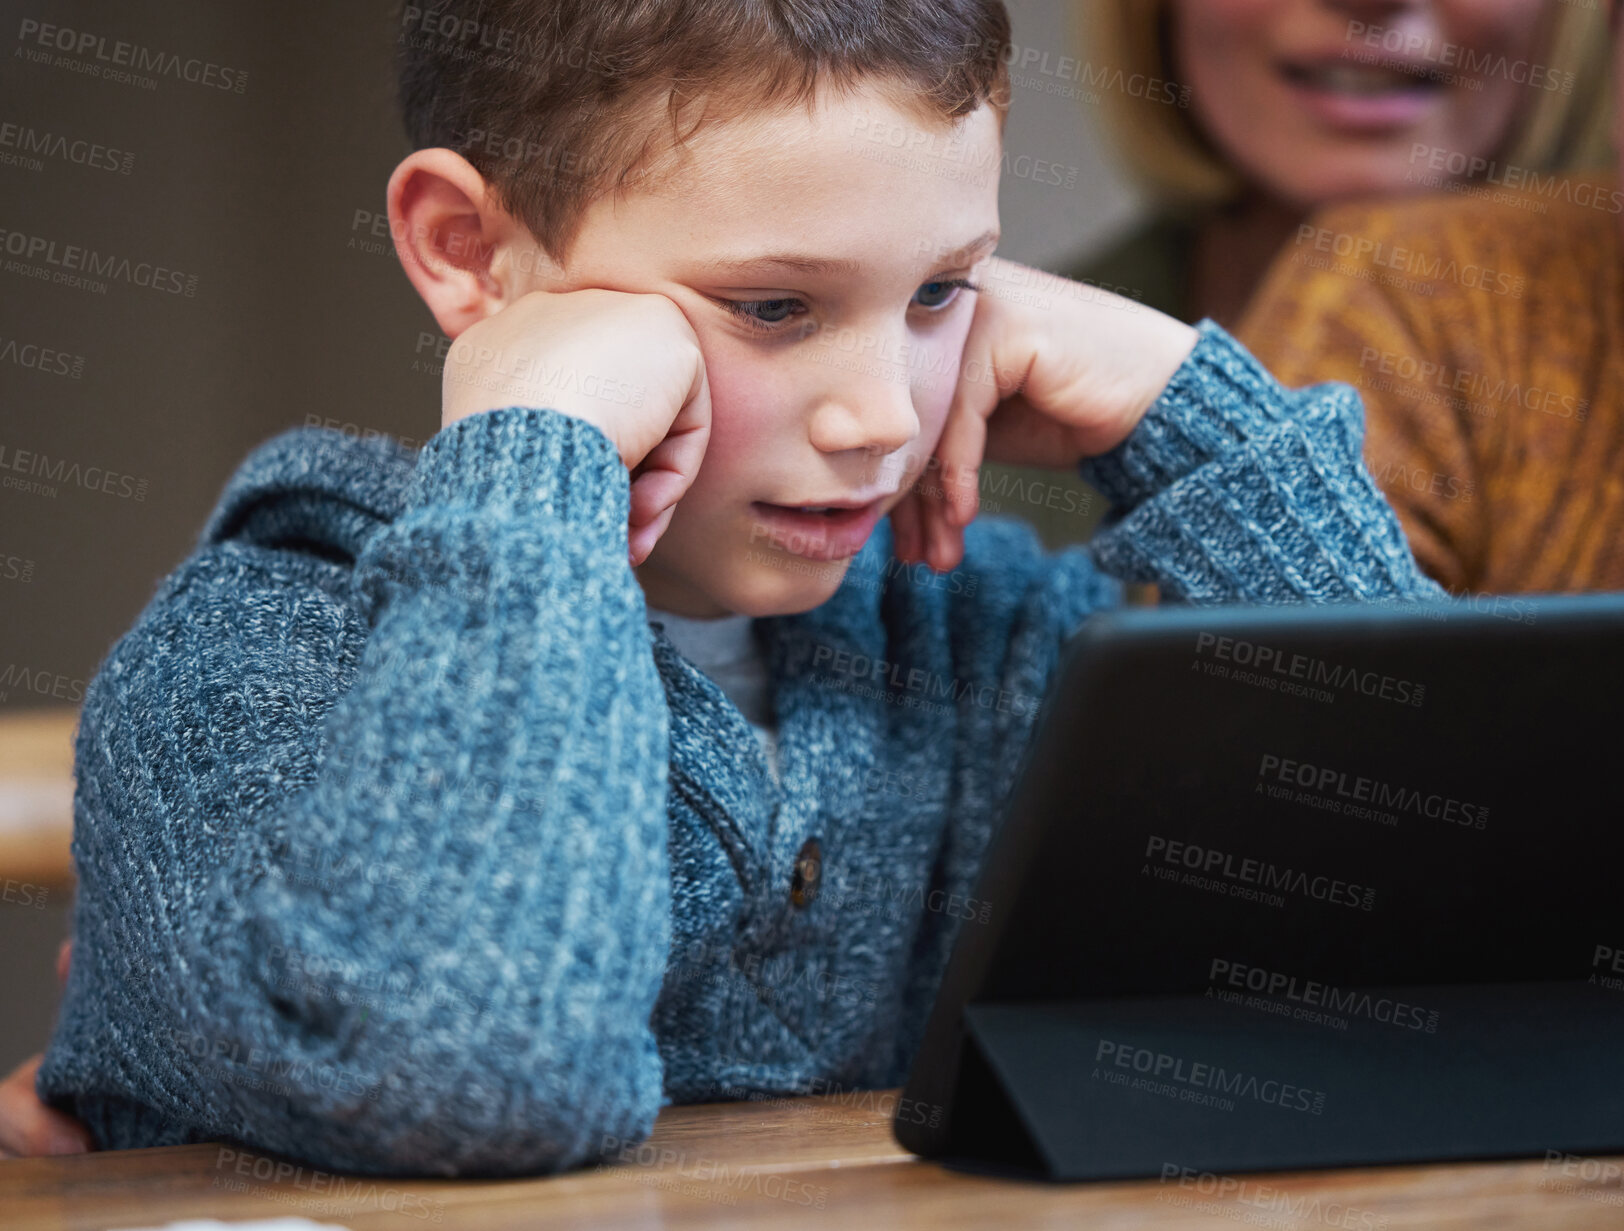 Buy stock photo Shot of a little boy using a digital tablet at home